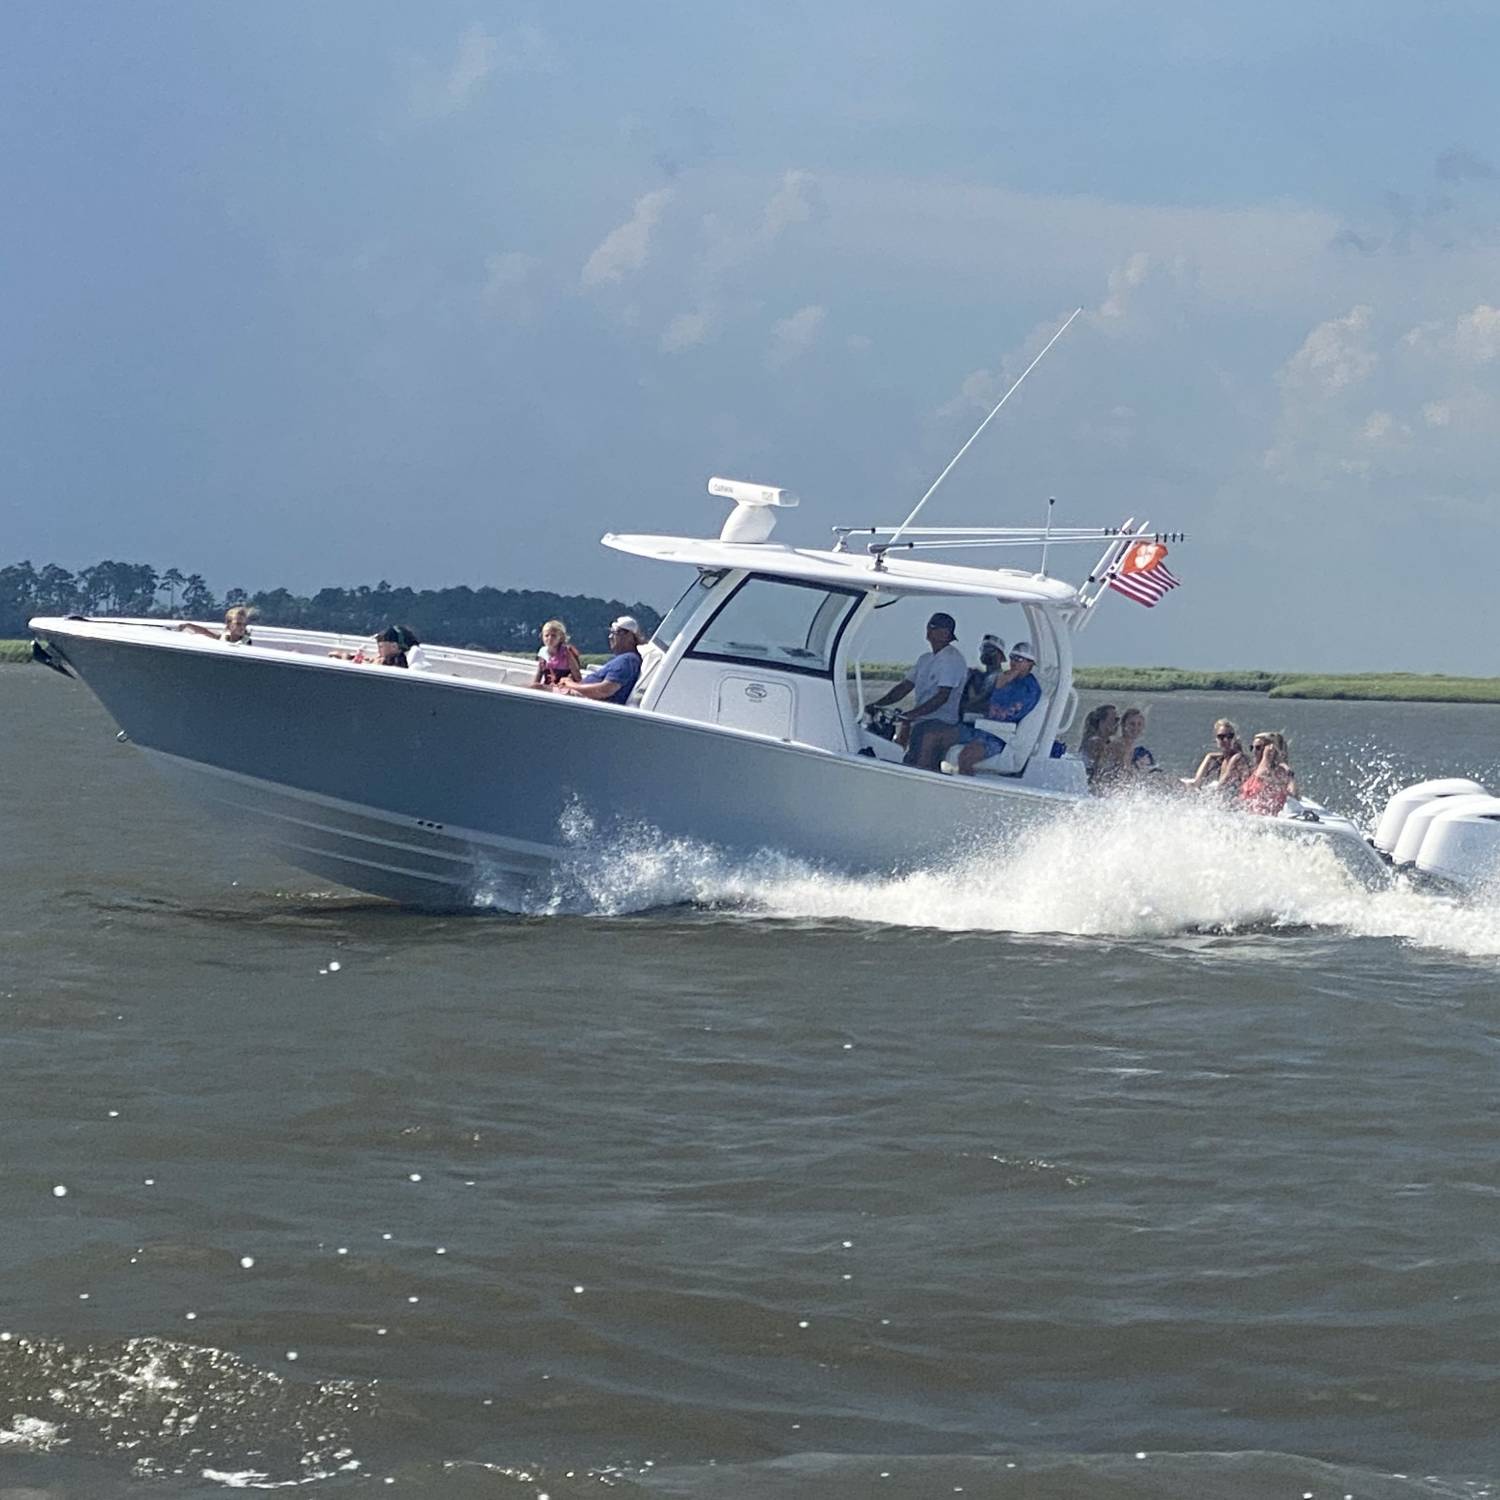 Title: Fourth Weekend - On board their Sportsman Open 352 Center Console - Location: Edisto Beach SC. Participating in the Photo Contest #SportsmanJuly